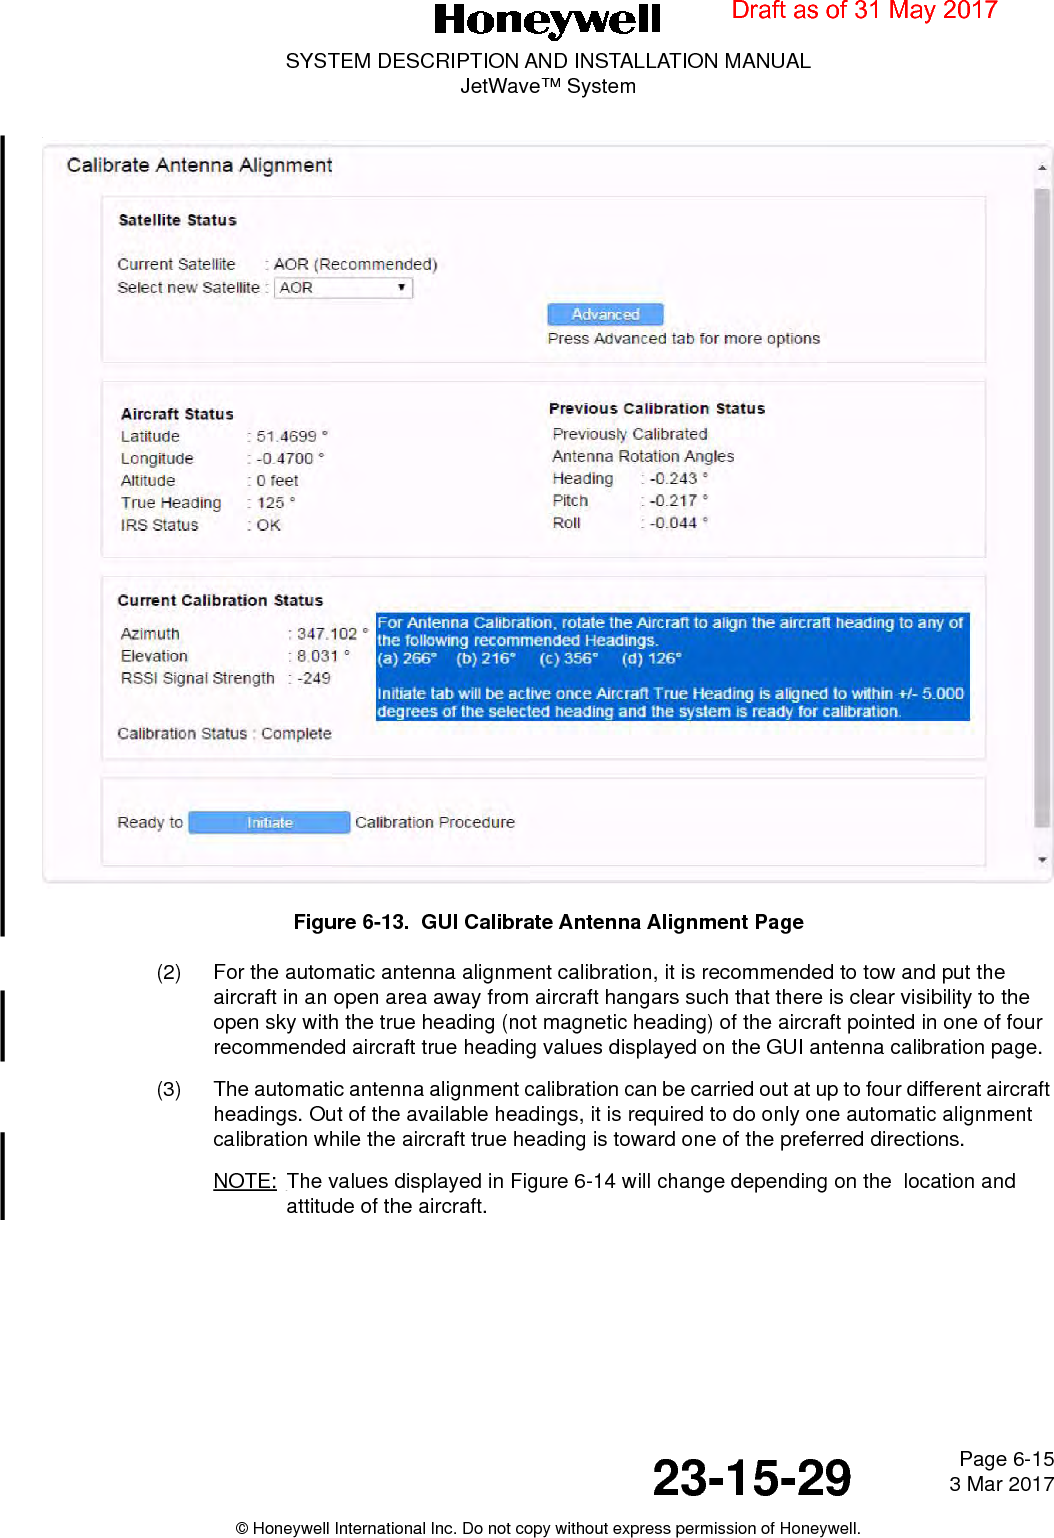 Page 6-15 3 Mar 201723-15-29SYSTEM DESCRIPTION AND INSTALLATION MANUALJetWave™ System© Honeywell International Inc. Do not copy without express permission of Honeywell.Figure 6-13.  GUI Calibrate Antenna Alignment Page(2) For the automatic antenna alignment calibration, it is recommended to tow and put the aircraft in an open area away from aircraft hangars such that there is clear visibility to the open sky with the true heading (not magnetic heading) of the aircraft pointed in one of four recommended aircraft true heading values displayed on the GUI antenna calibration page. (3) The automatic antenna alignment calibration can be carried out at up to four different aircraft headings. Out of the available headings, it is required to do only one automatic alignment calibration while the aircraft true heading is toward one of the preferred directions.NOTE: The values displayed in Figure 6-14 will change depending on the  location and attitude of the aircraft.Draft as of 31 May 2017